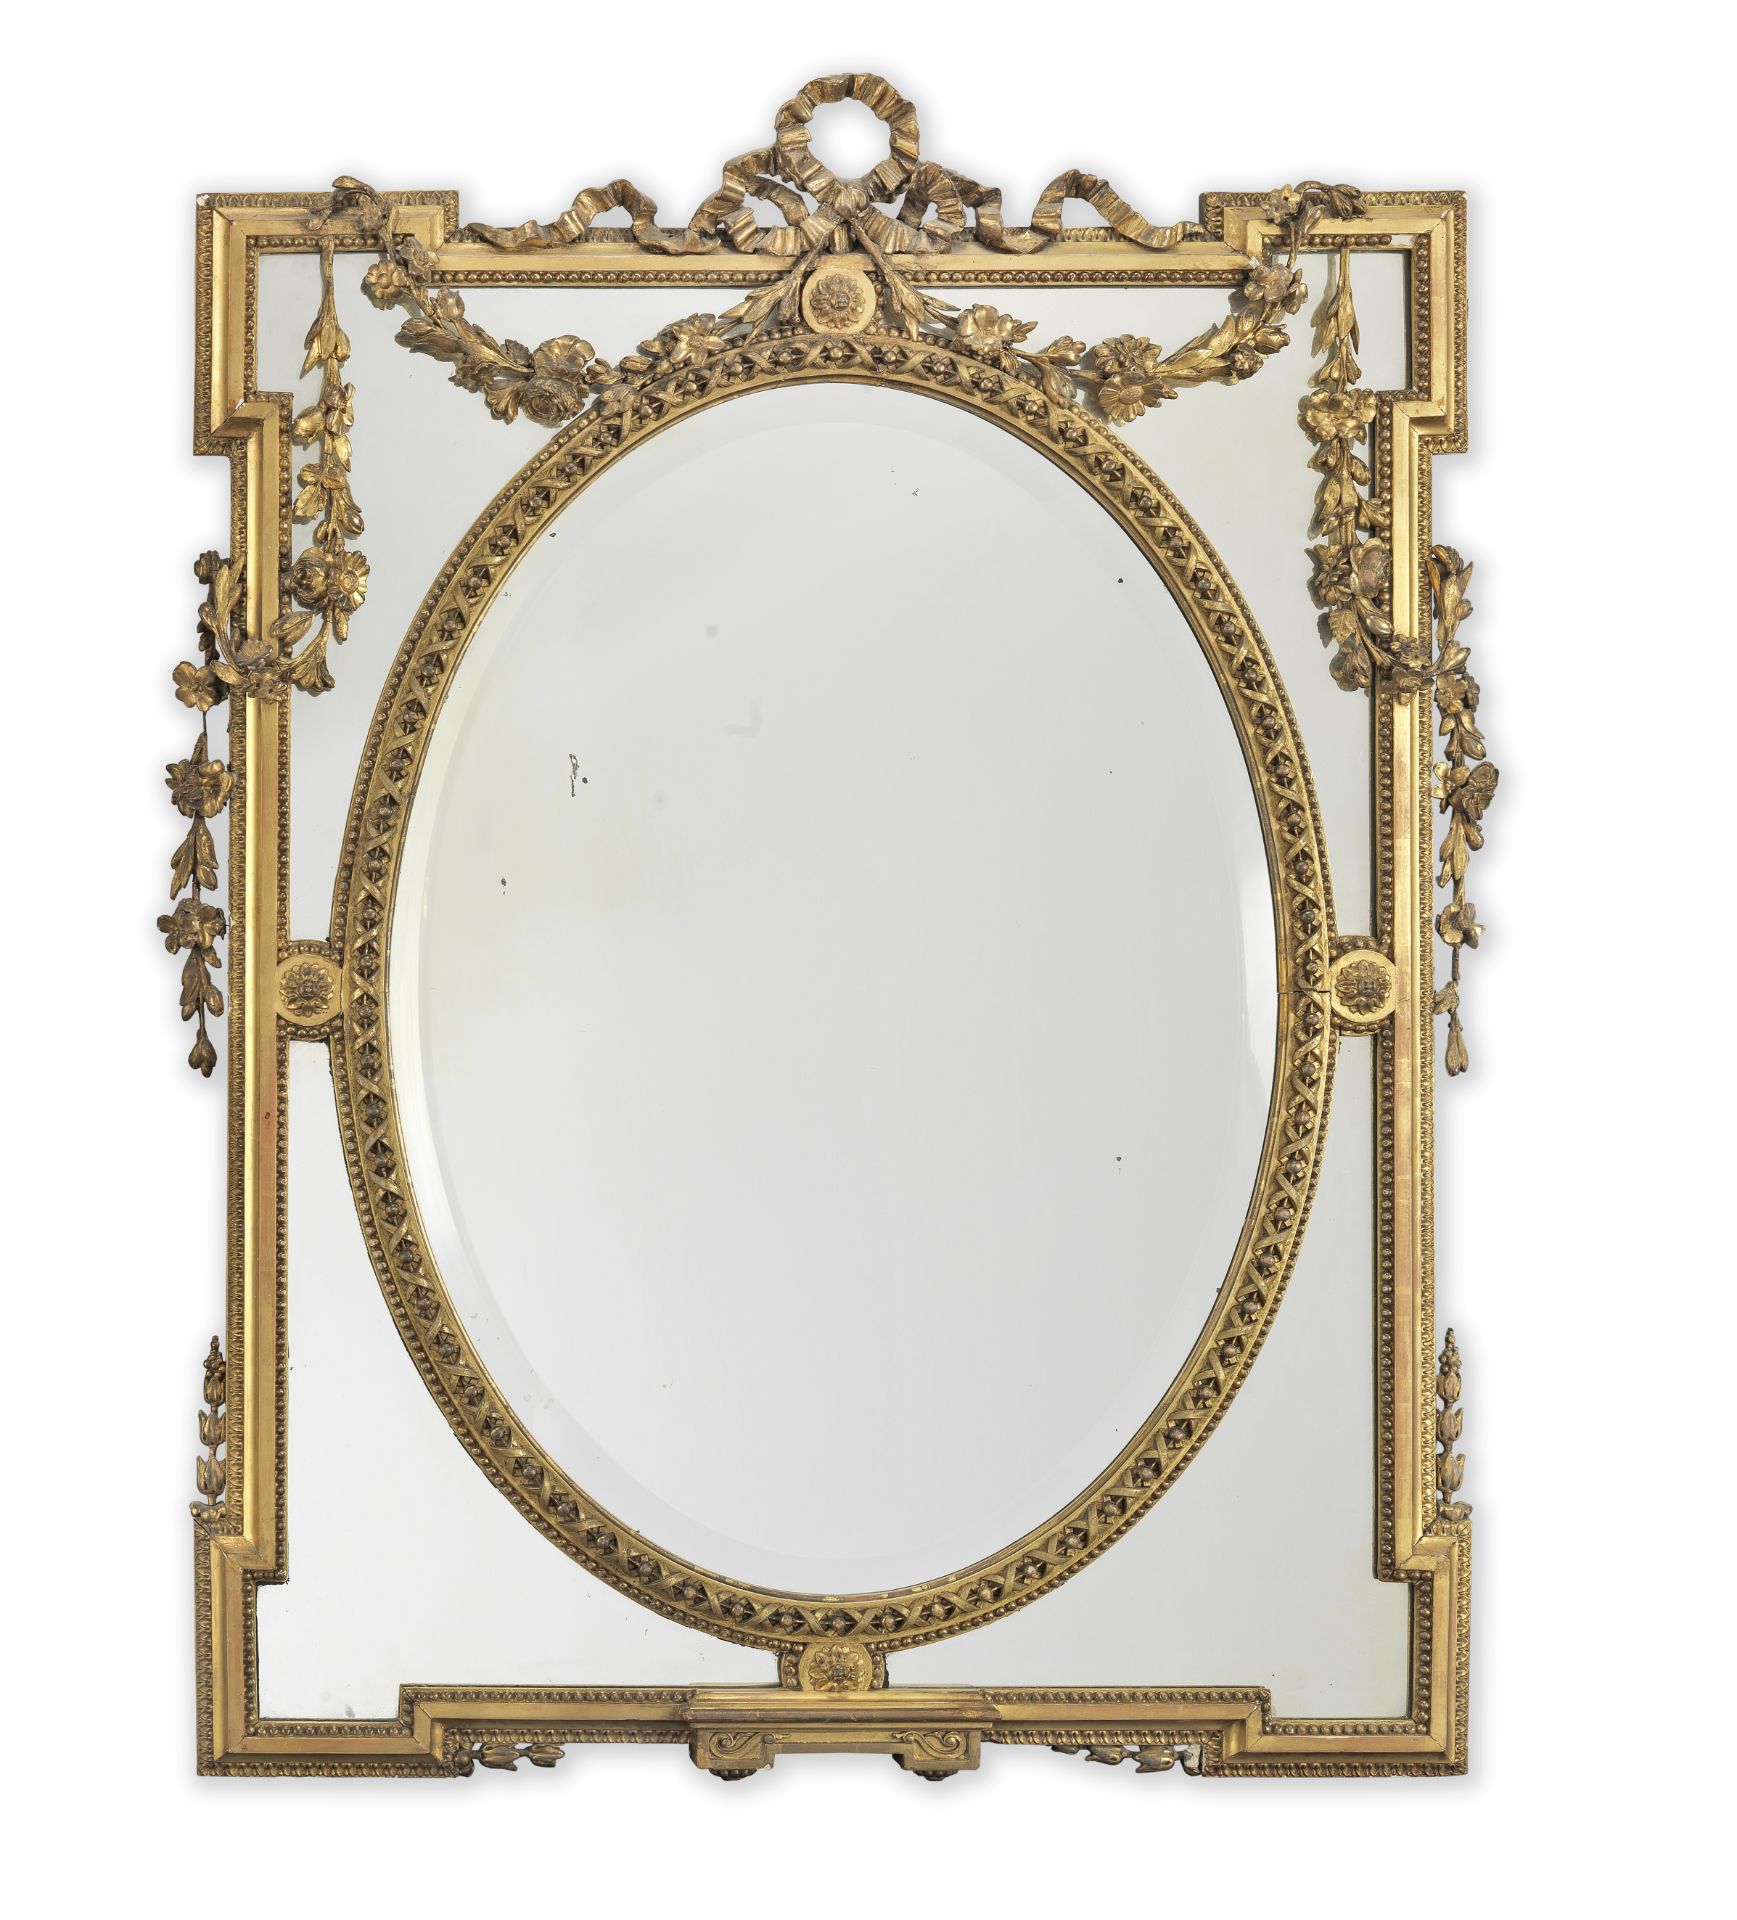 A French late 19th century giltwood and gilt composition marginal mirror in the Louis XVI style